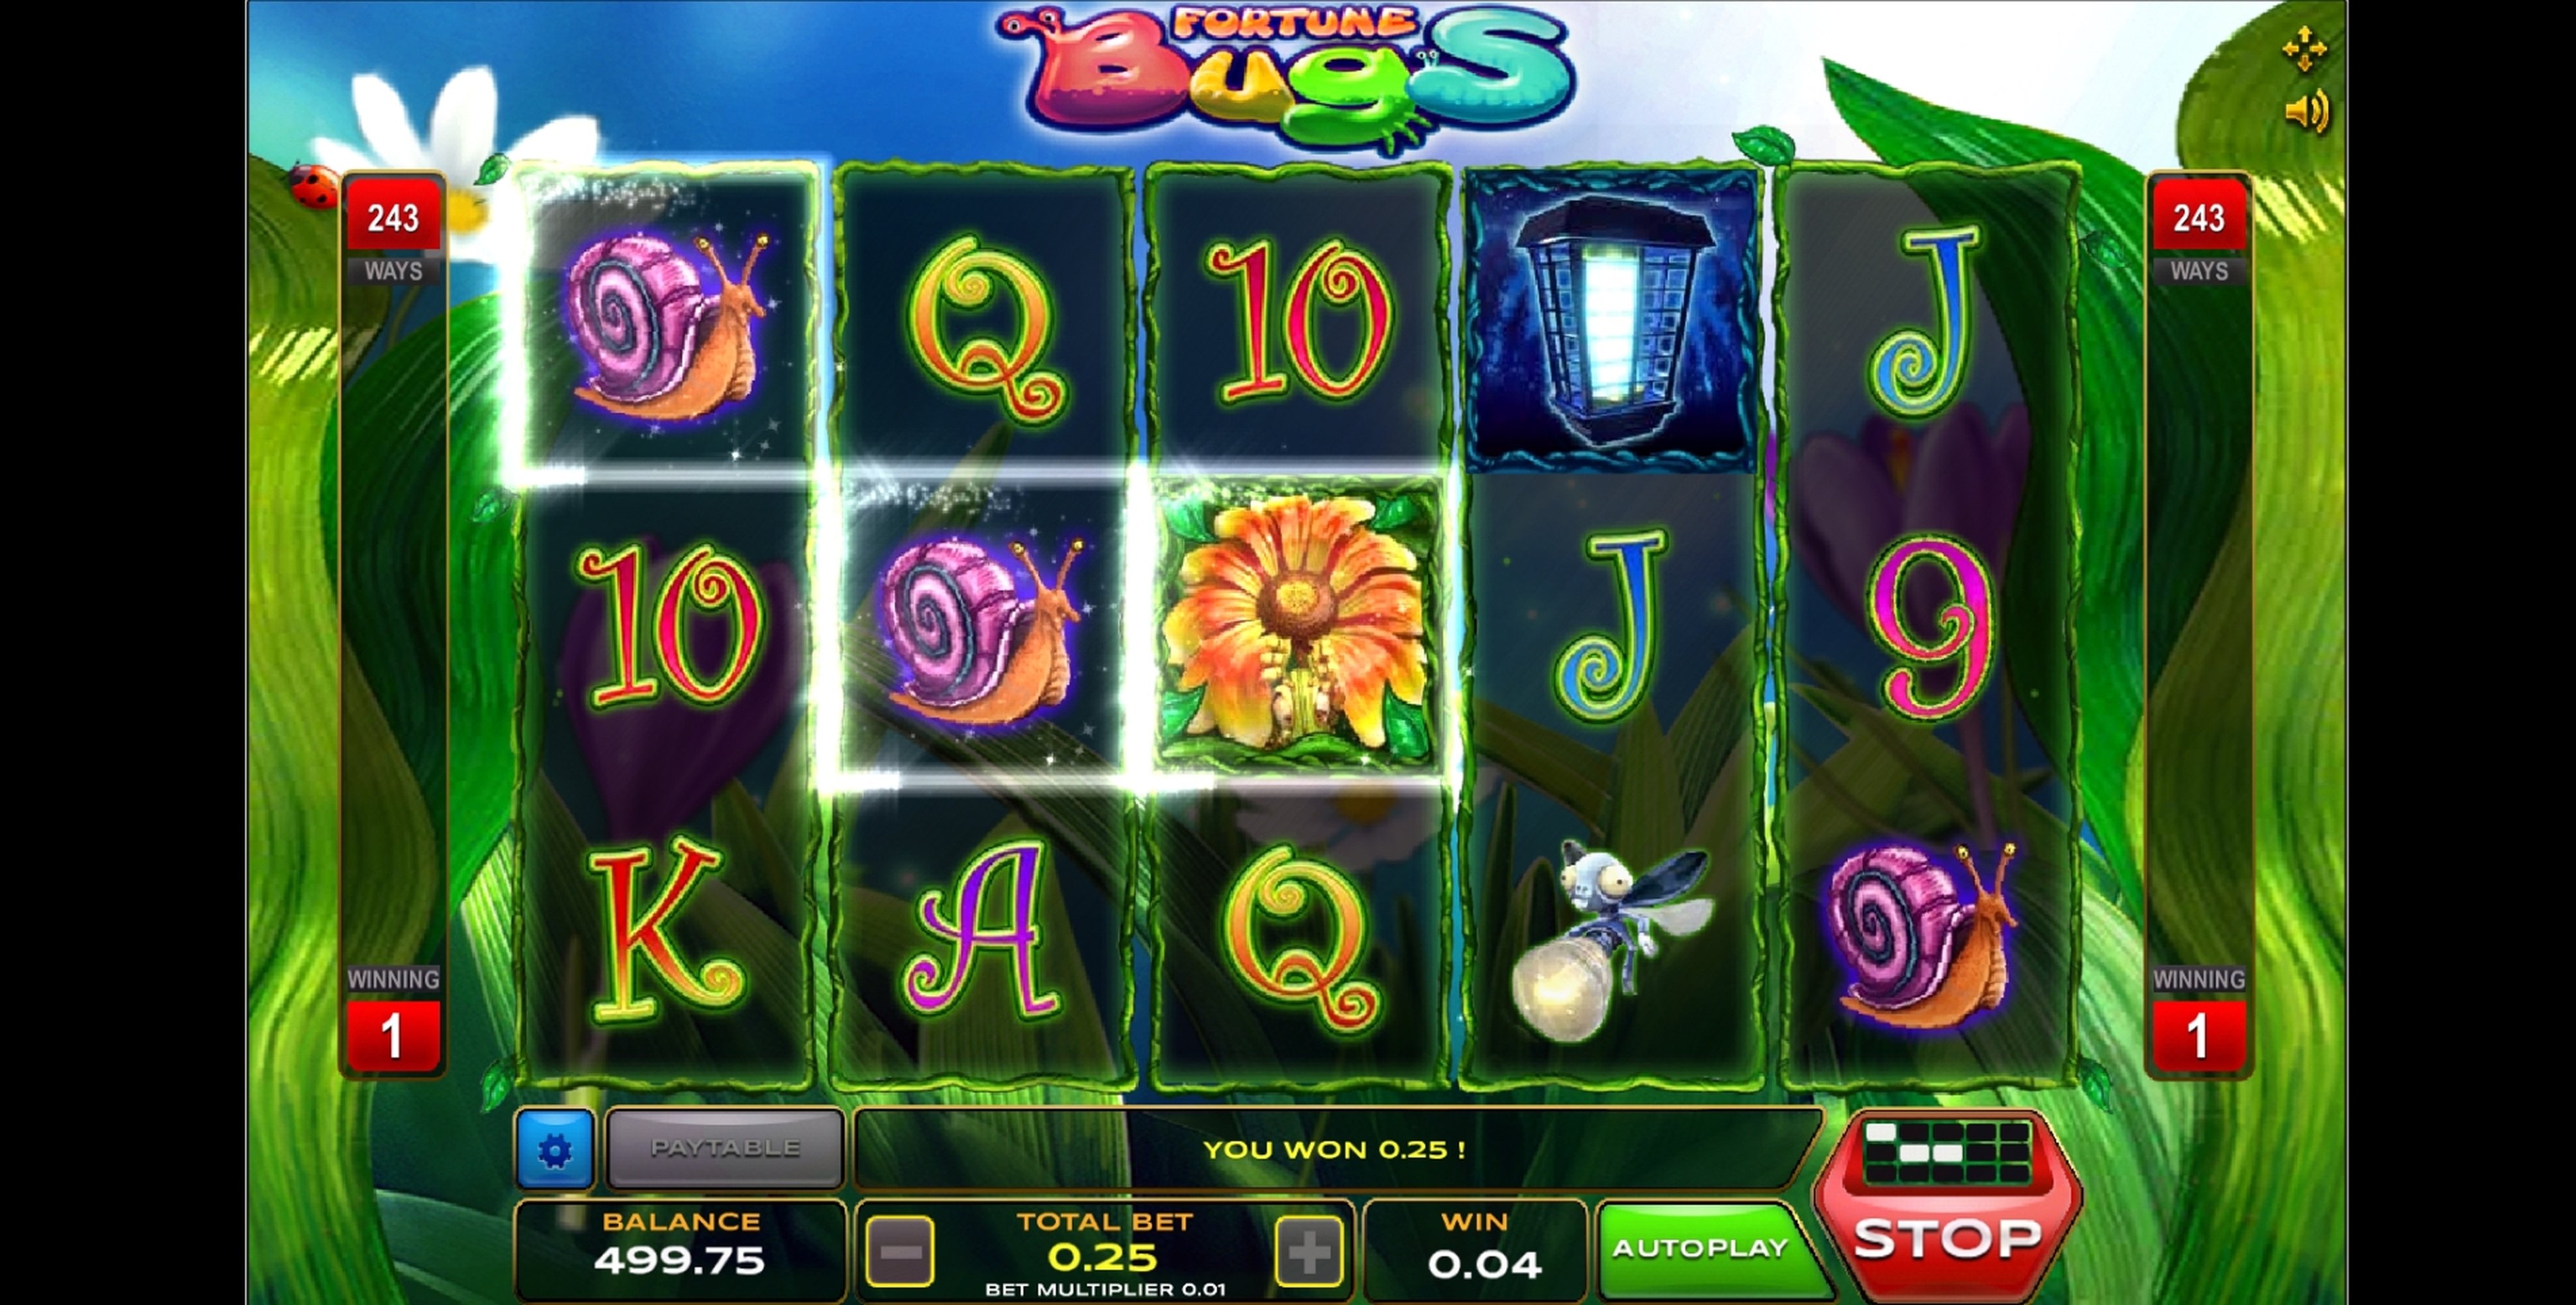 Win Money in Fortune Bugs Free Slot Game by Xplosive Slots Group